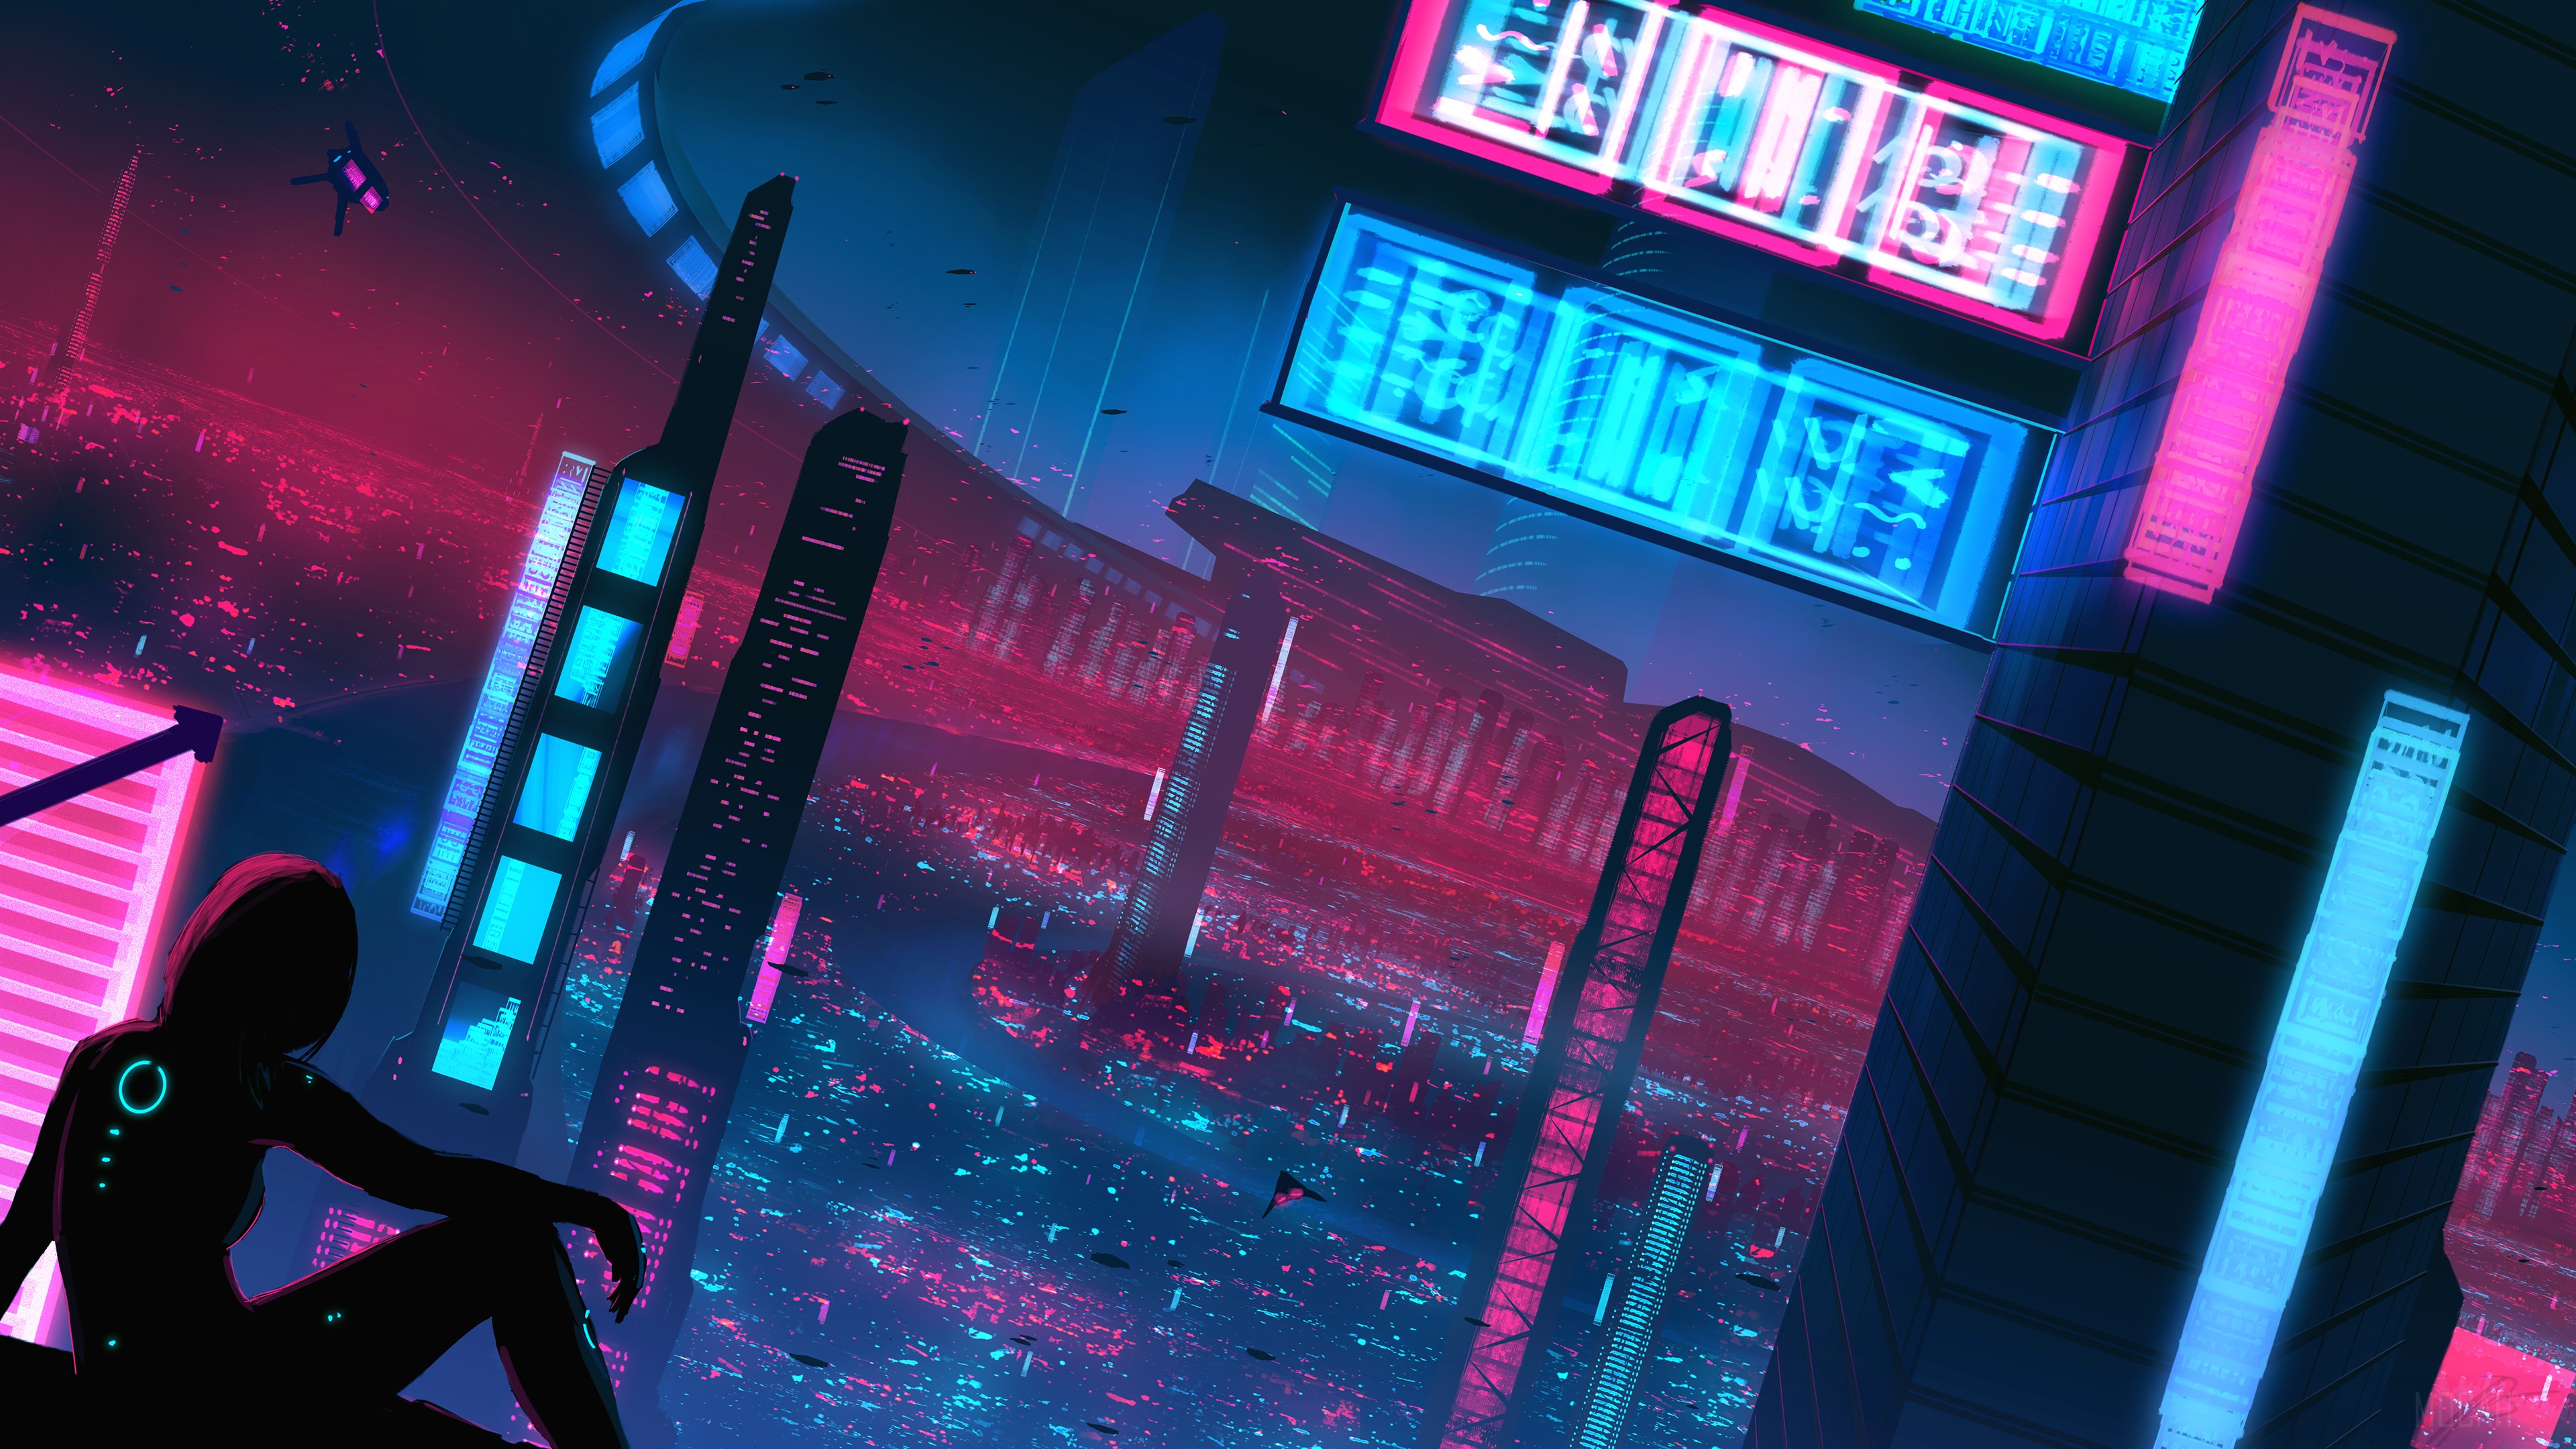 A woman sitting on the ground in front of some buildings - Cyberpunk